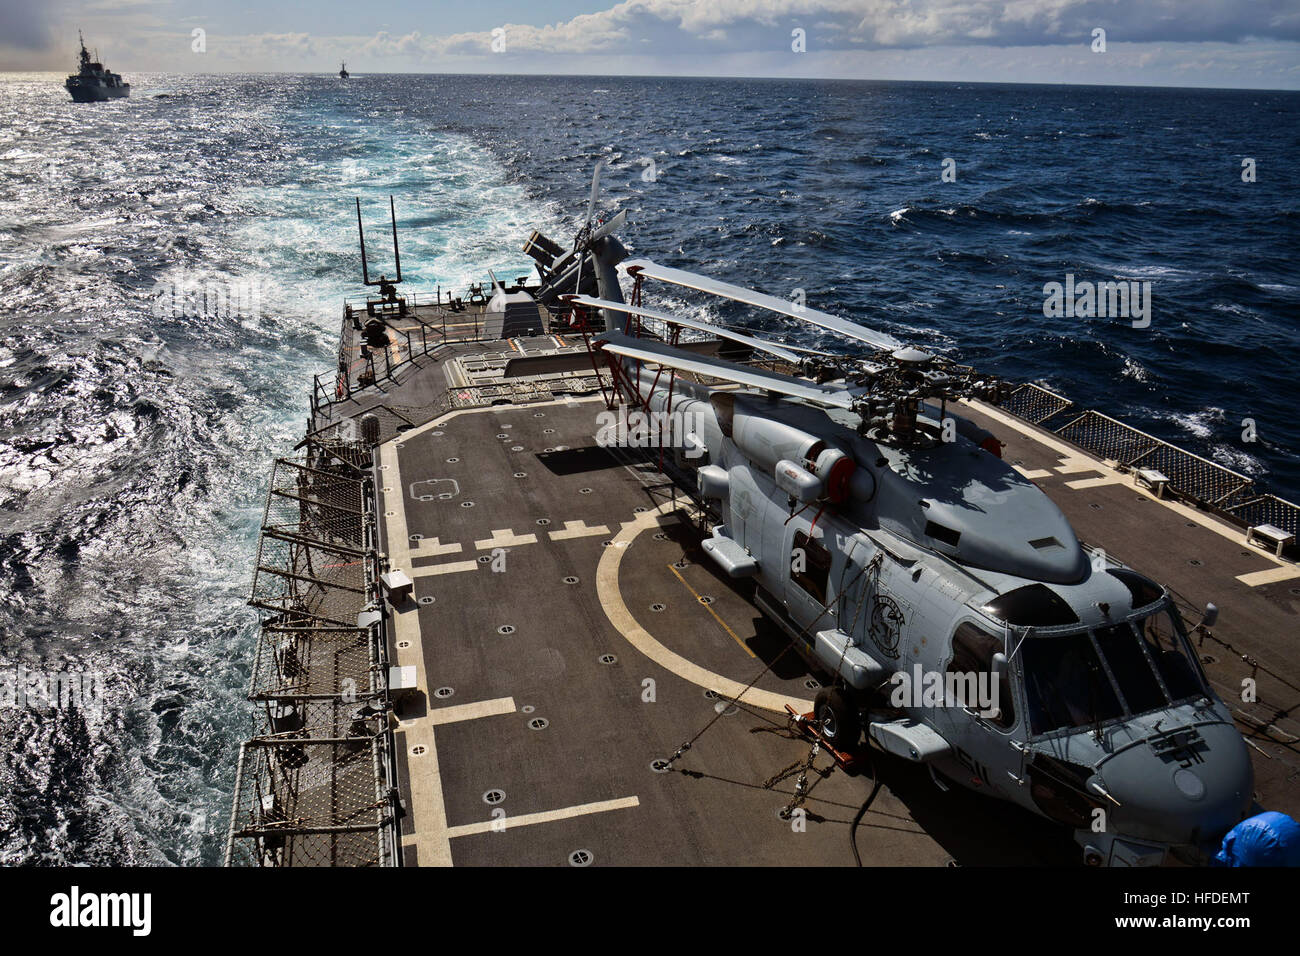 150430-N-IY633-077 ATLANTIC OCEAN (April 30, 2015) - An MH-60R Seahawk helicopter assigned to the Vipers of Helicopter Maritime Strike Squadron 48, Detachment Three, embarked aboard Standing NATO Maritime Group 2 (SNMG2) flagship USS Vicksburg (CG 69), sits on the ship's flight deck during an underway replenishment evolution among SNMG2 ships. SNMG2 is currently deployed to the Atlantic participating in a series of exercises designed to improve interoperability among NATO and non-NATO maritime forces. (U.S. Navy photo by Mass Communication Specialist 2nd Class Amanda S. Kitchner/Released) Unde Stock Photo